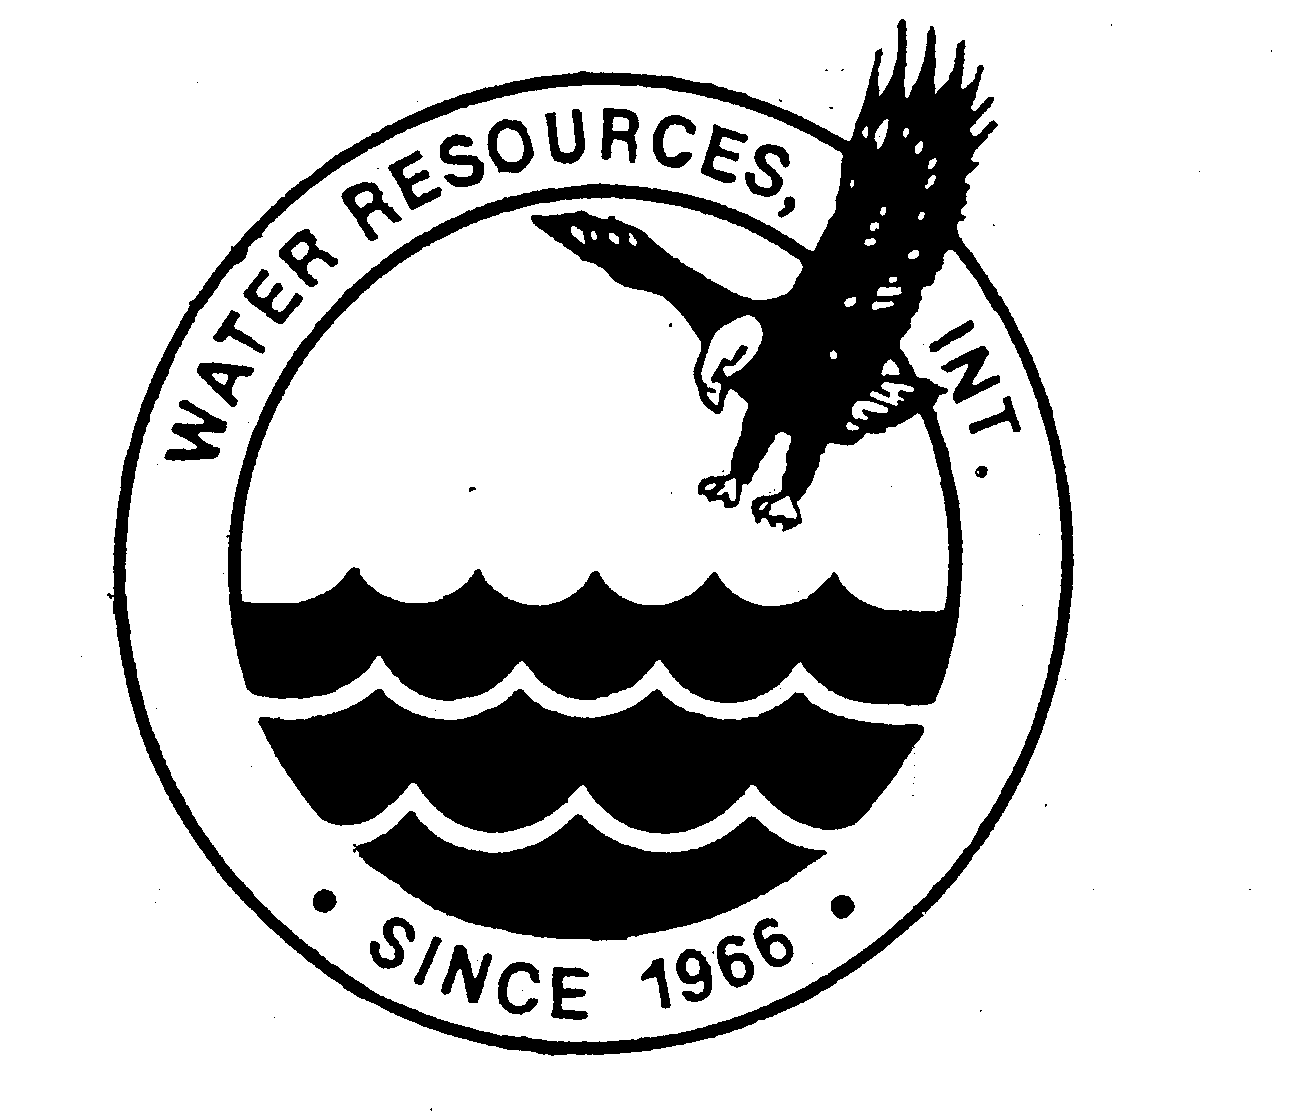  WATER RESOURCES, INT. SINCE 1966